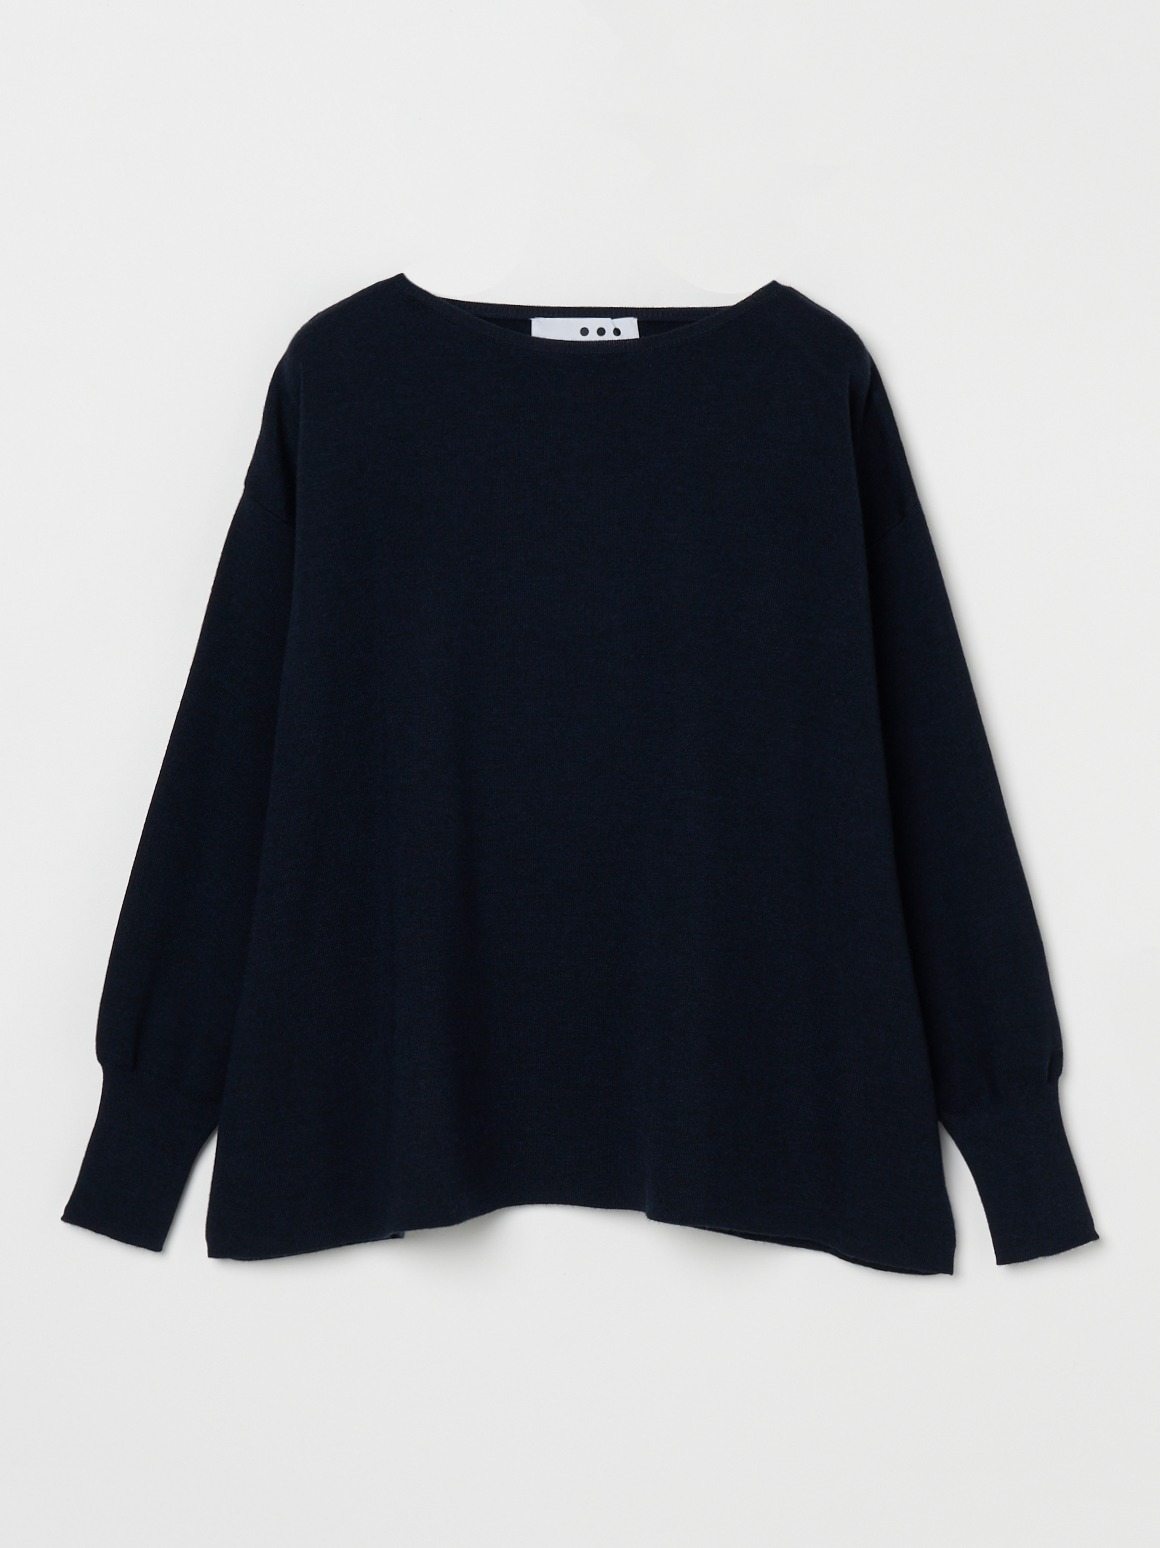 Wool outfit l/s boatneck 詳細画像 navy 1